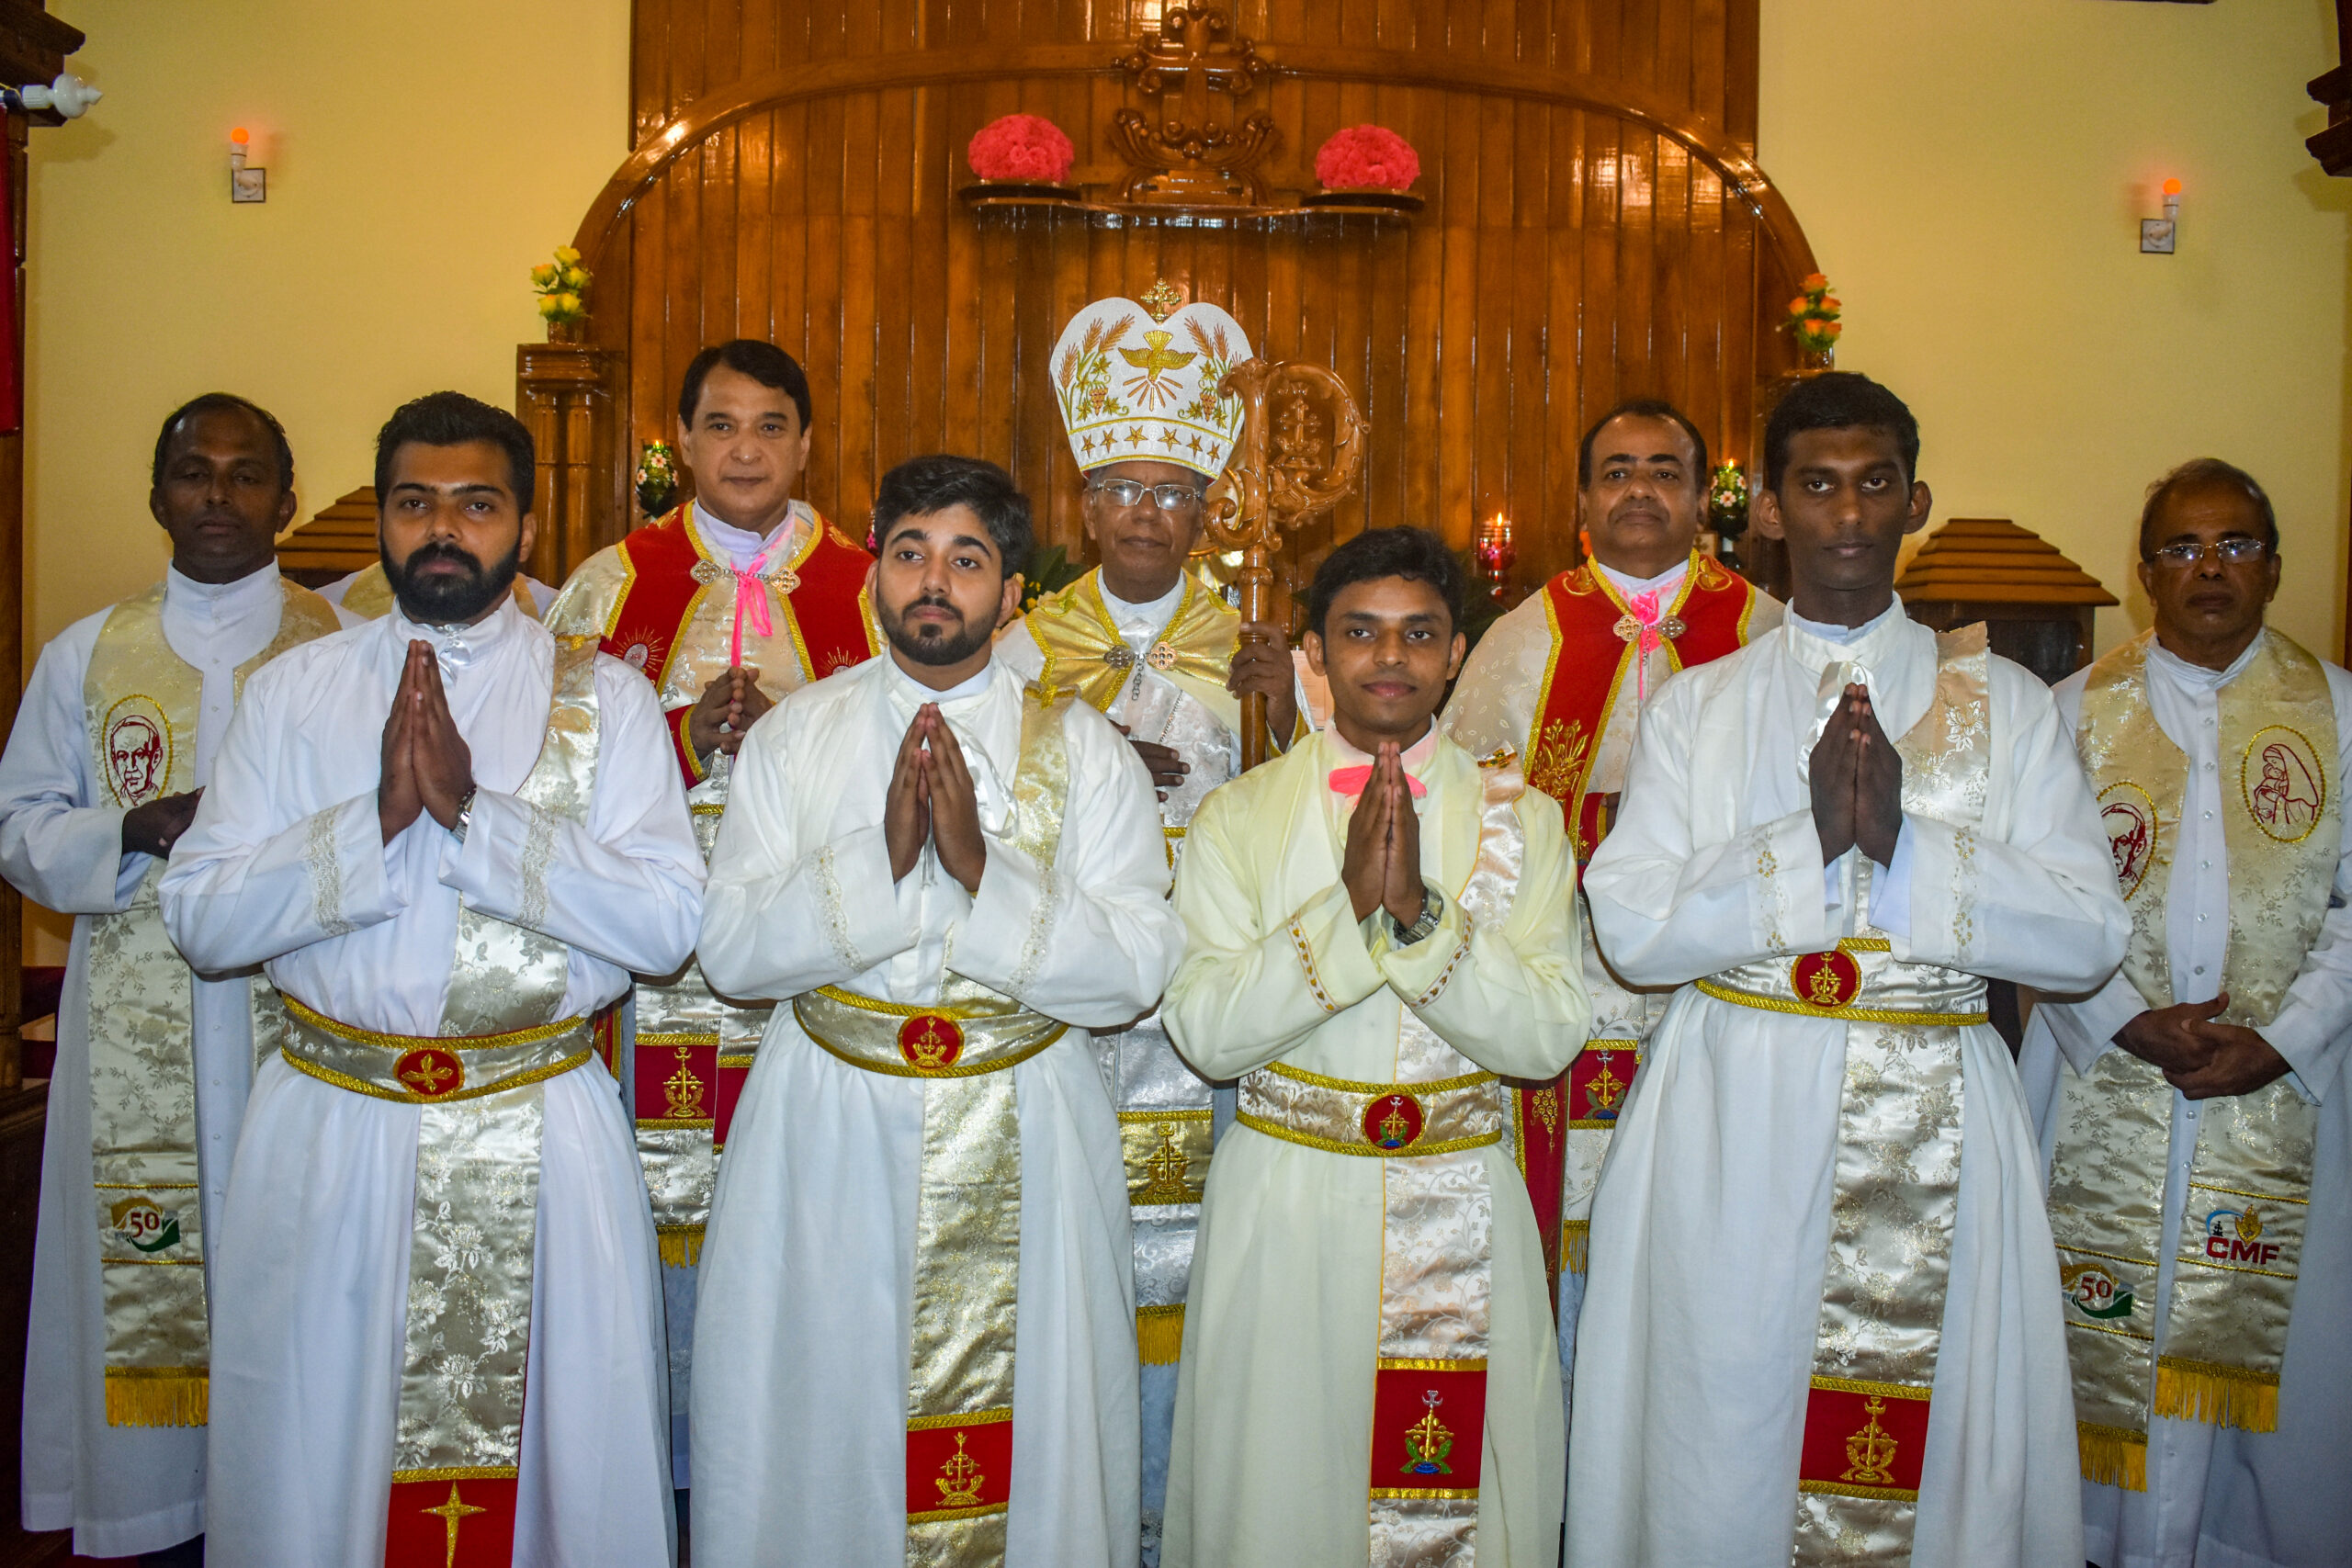 Perpetual Profession and Diaconate Ordination at St. Thomas Province